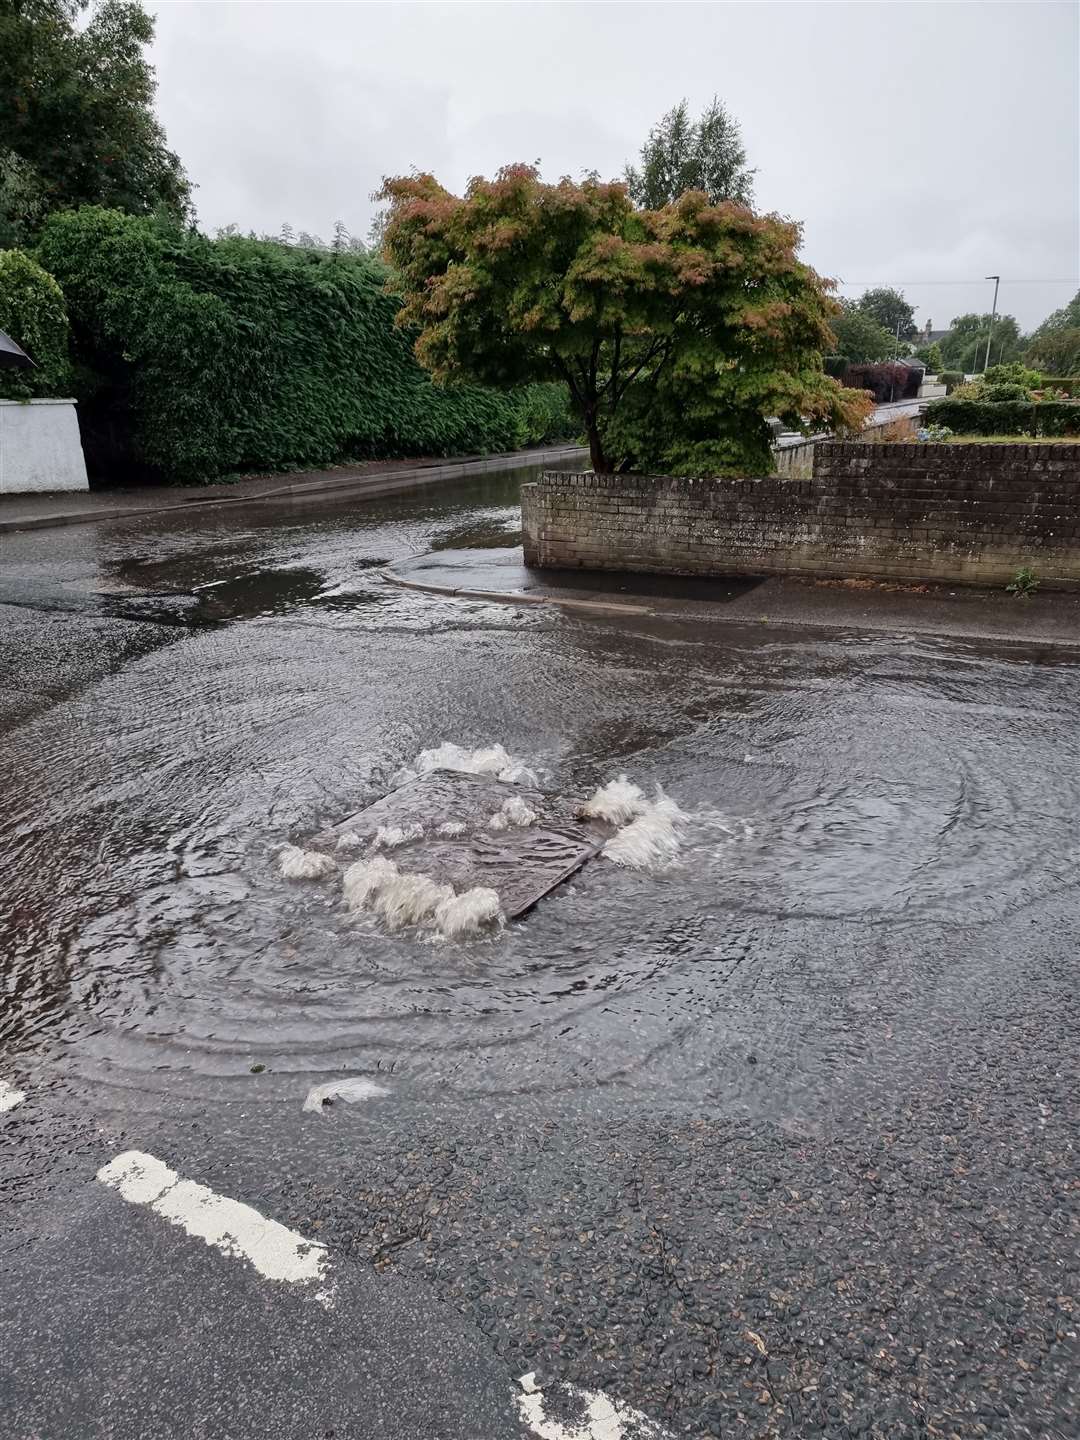 An overflowing drain on Thornhill Road leading to Councillors Walk.